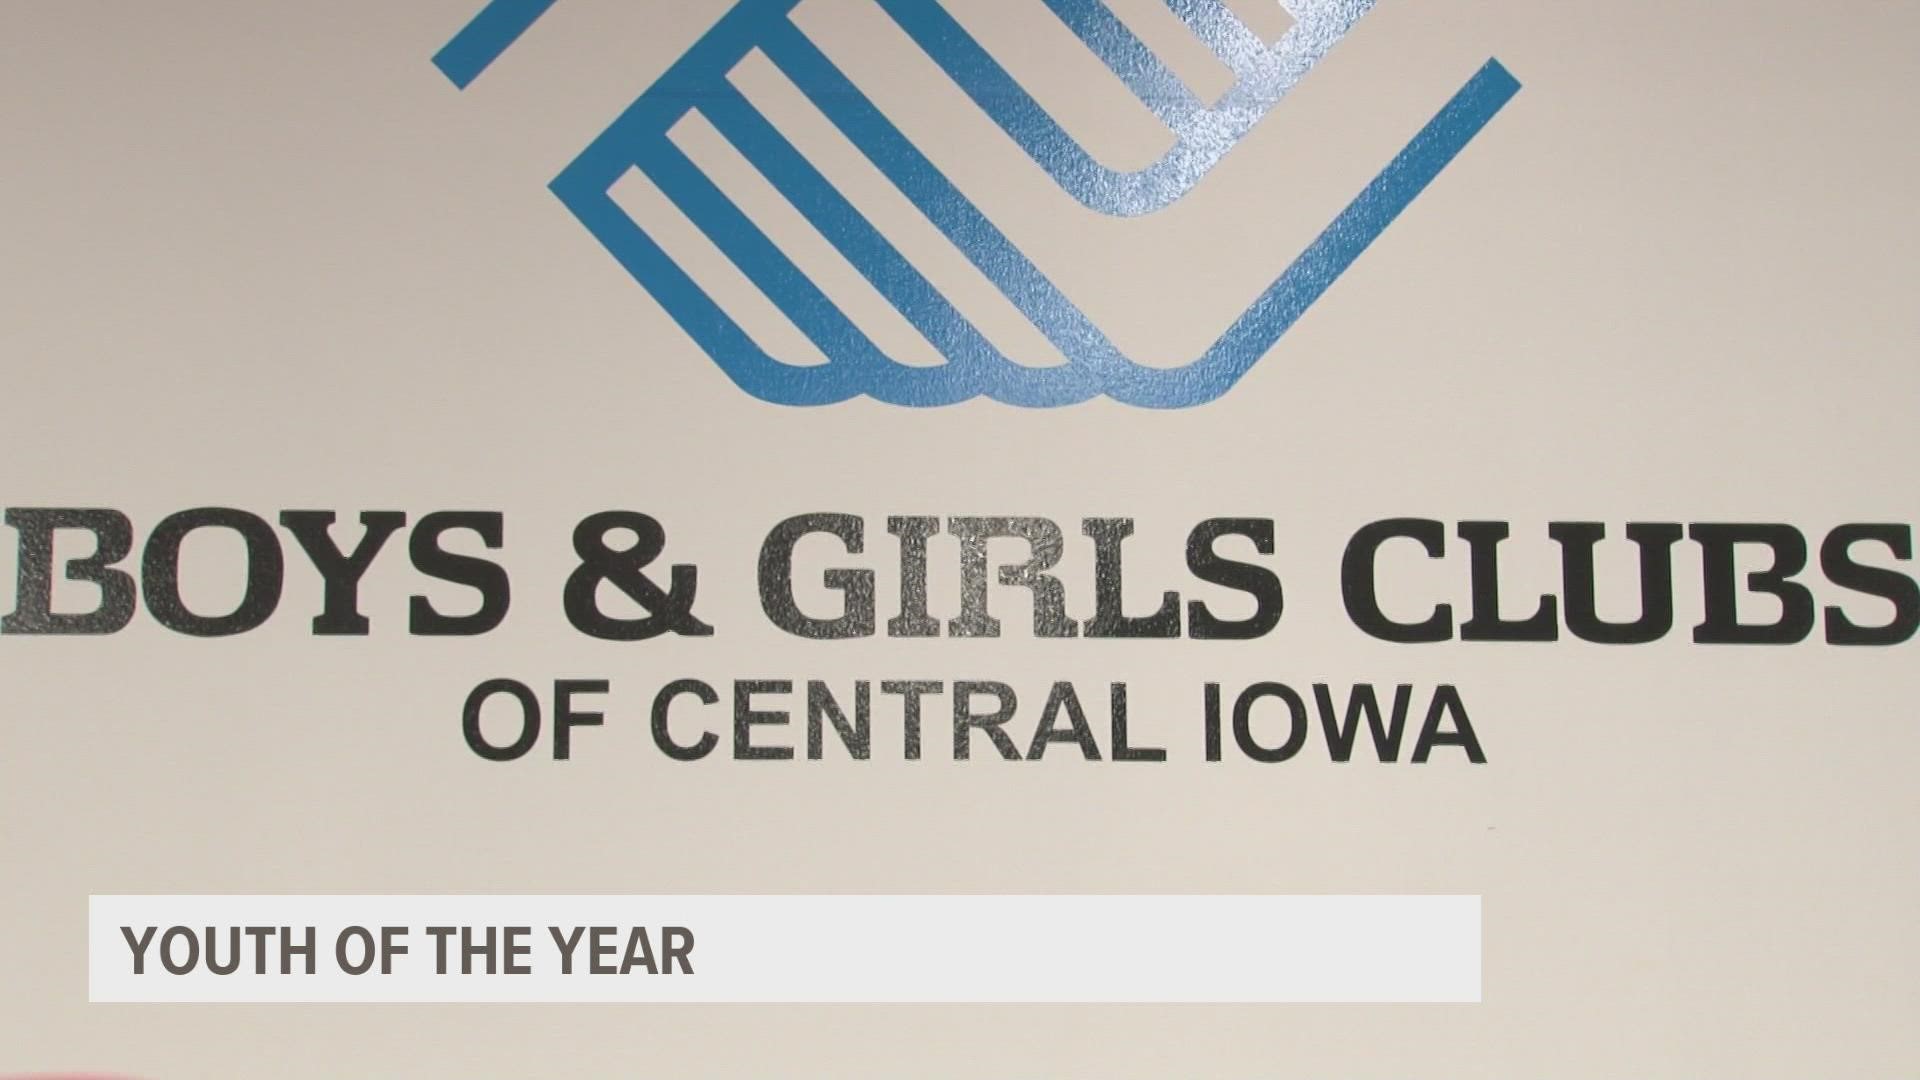 A local teen who overcame hardship was honored with Boys and Girls Club Youth of the Year award.